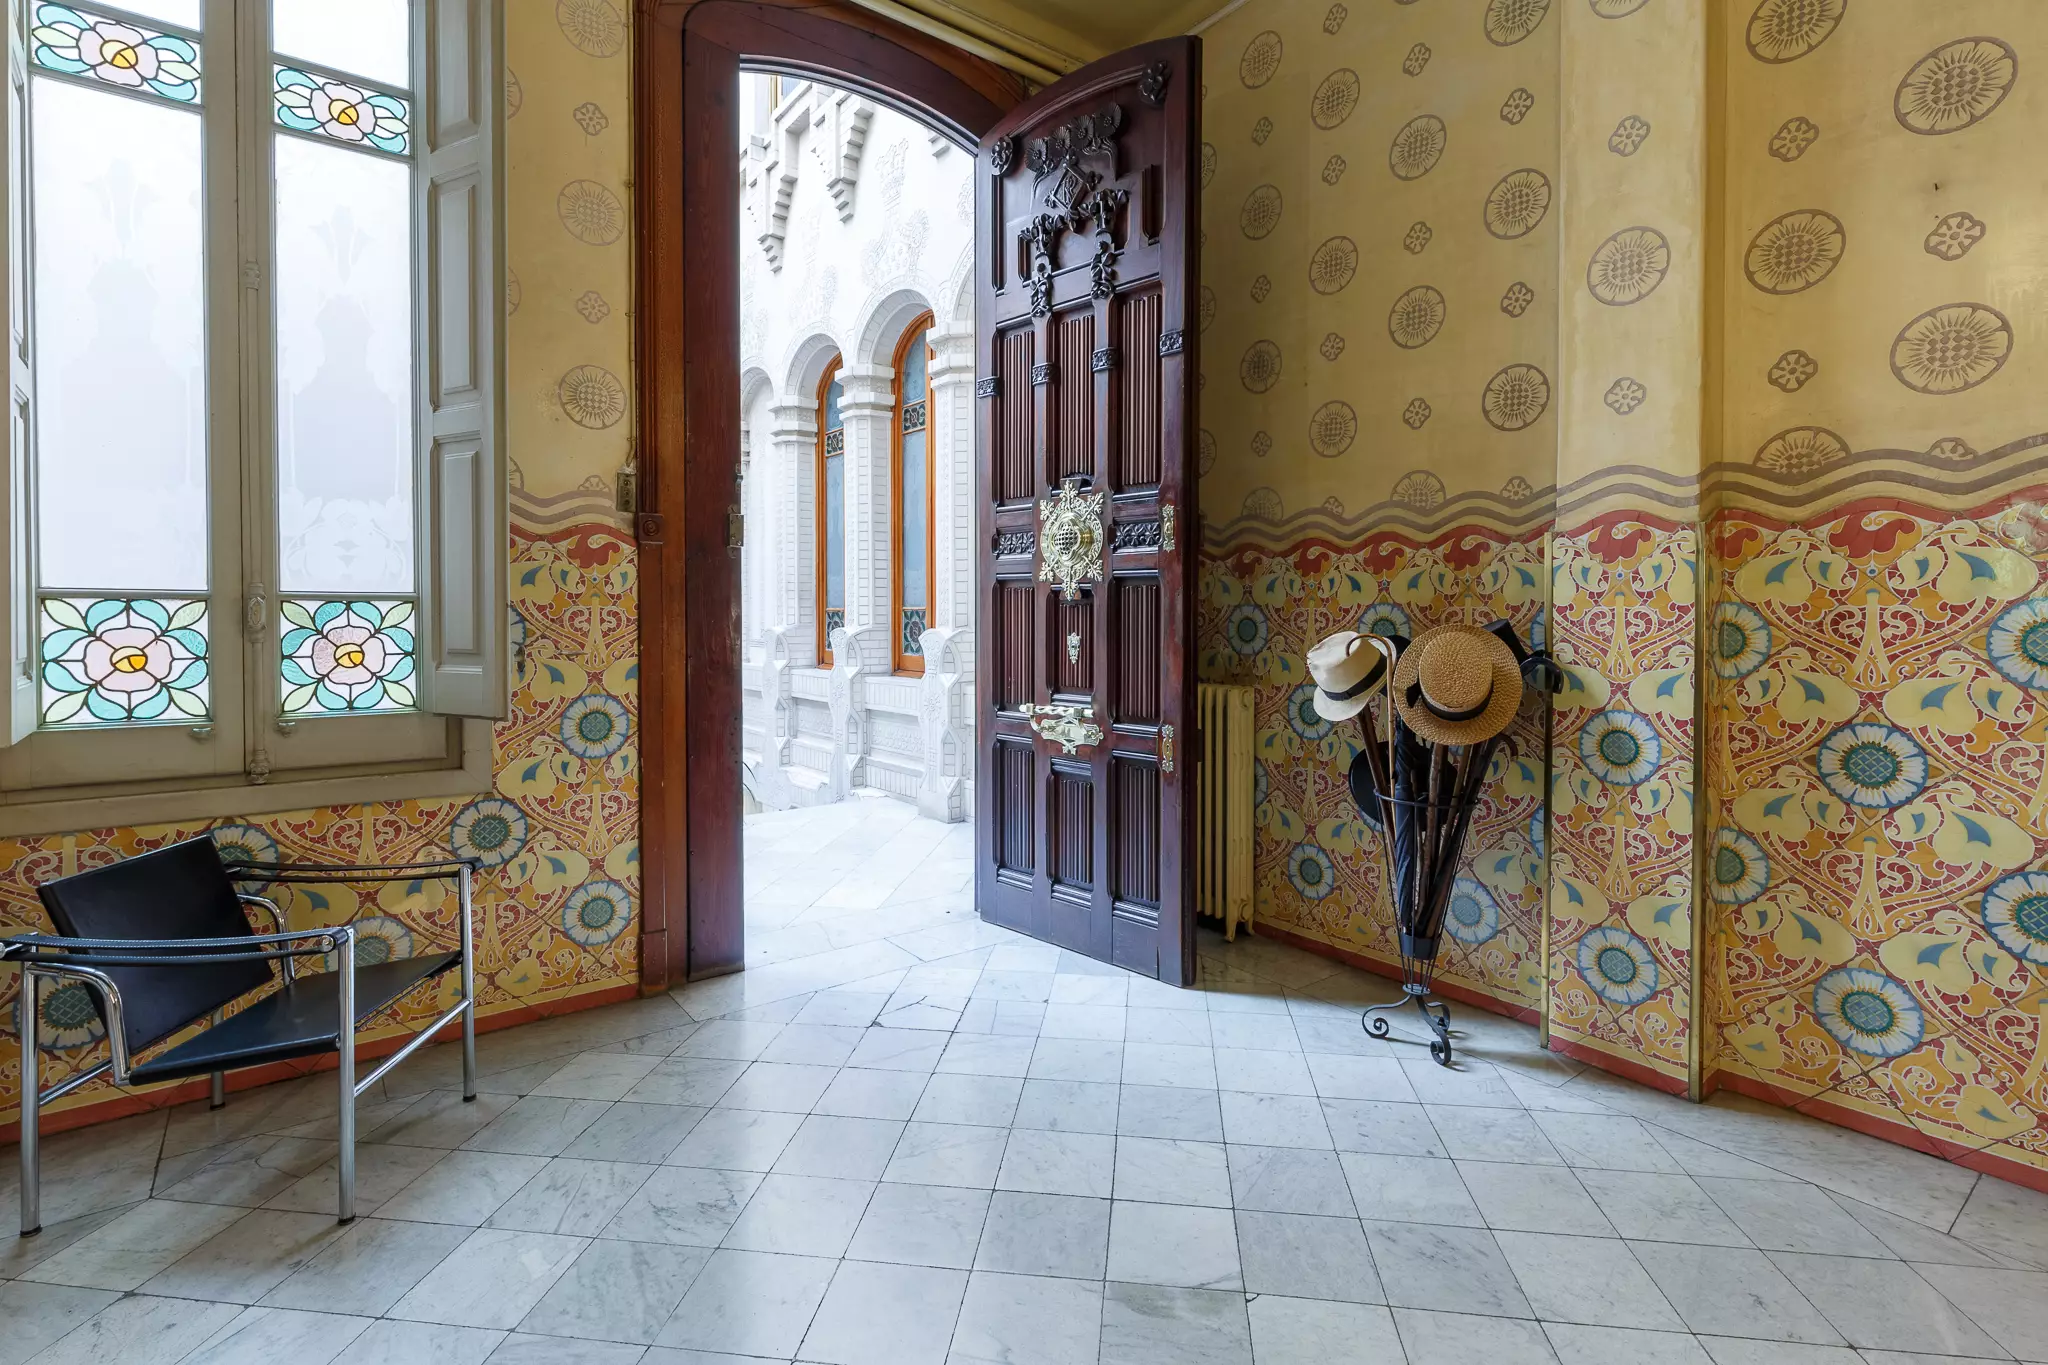 The interiors feature elaborately carved wooden doors and apricot-coloured tiles (